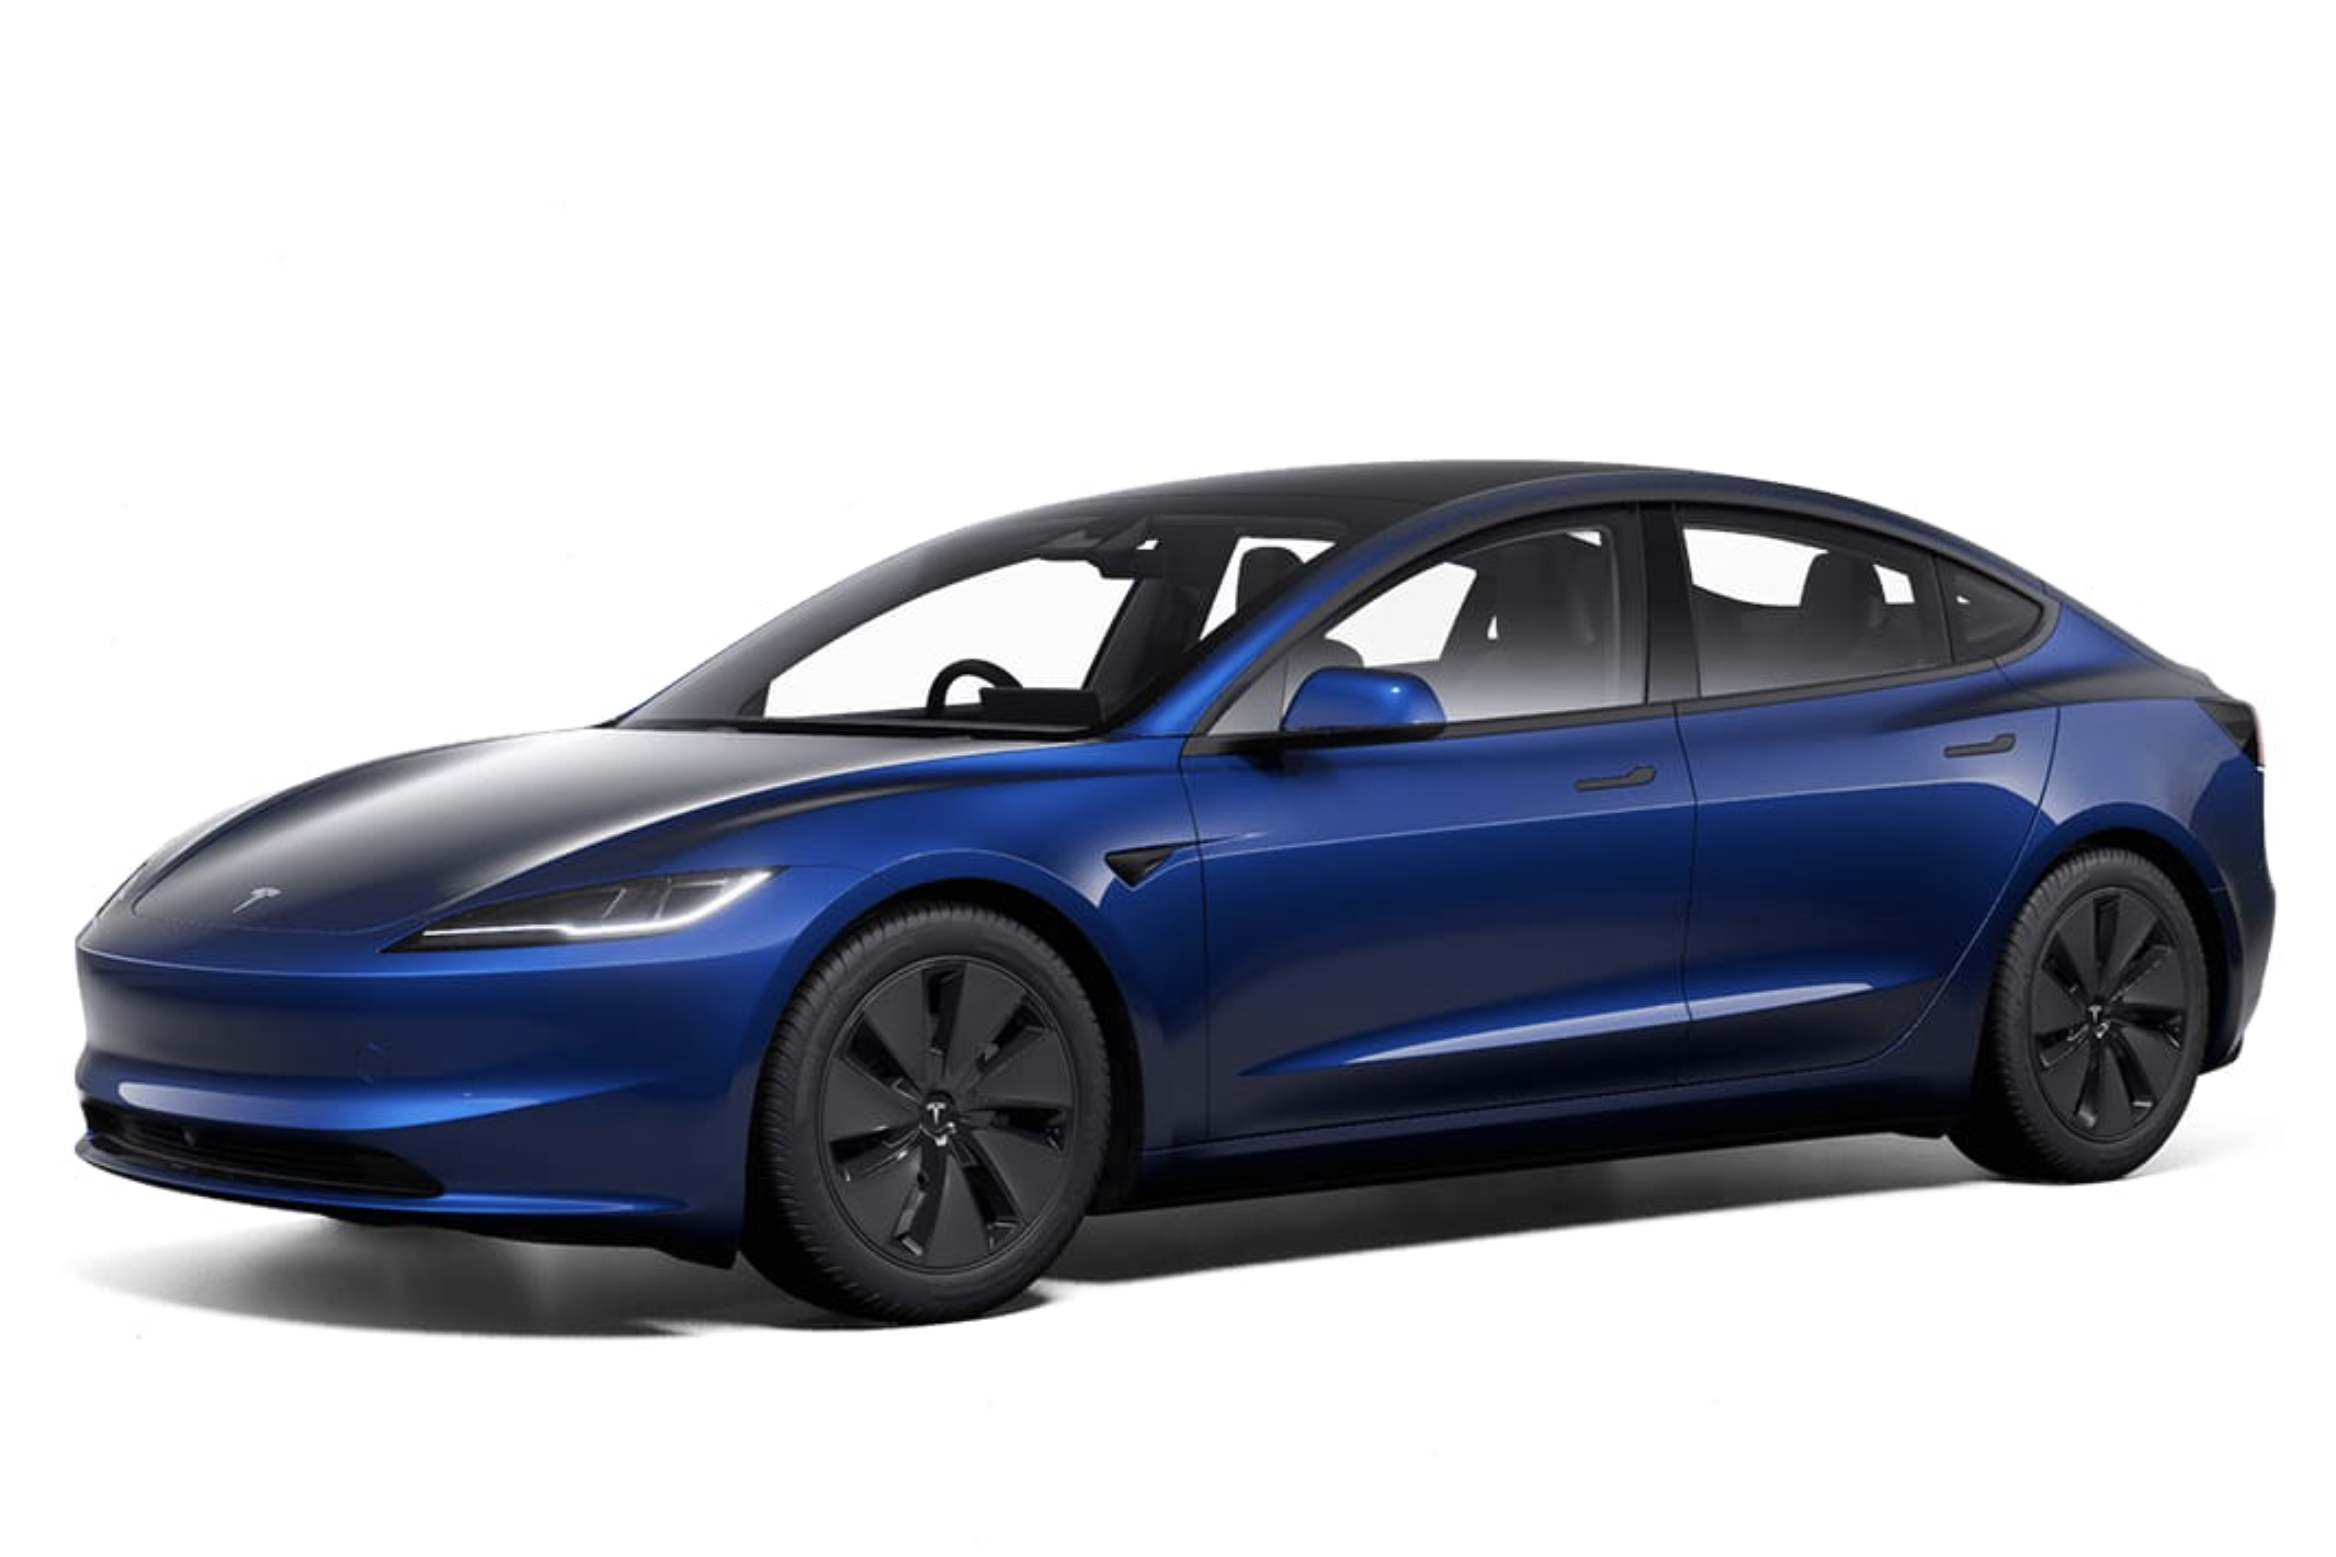 Tesla: Current and upcoming models, prices, specs, and more